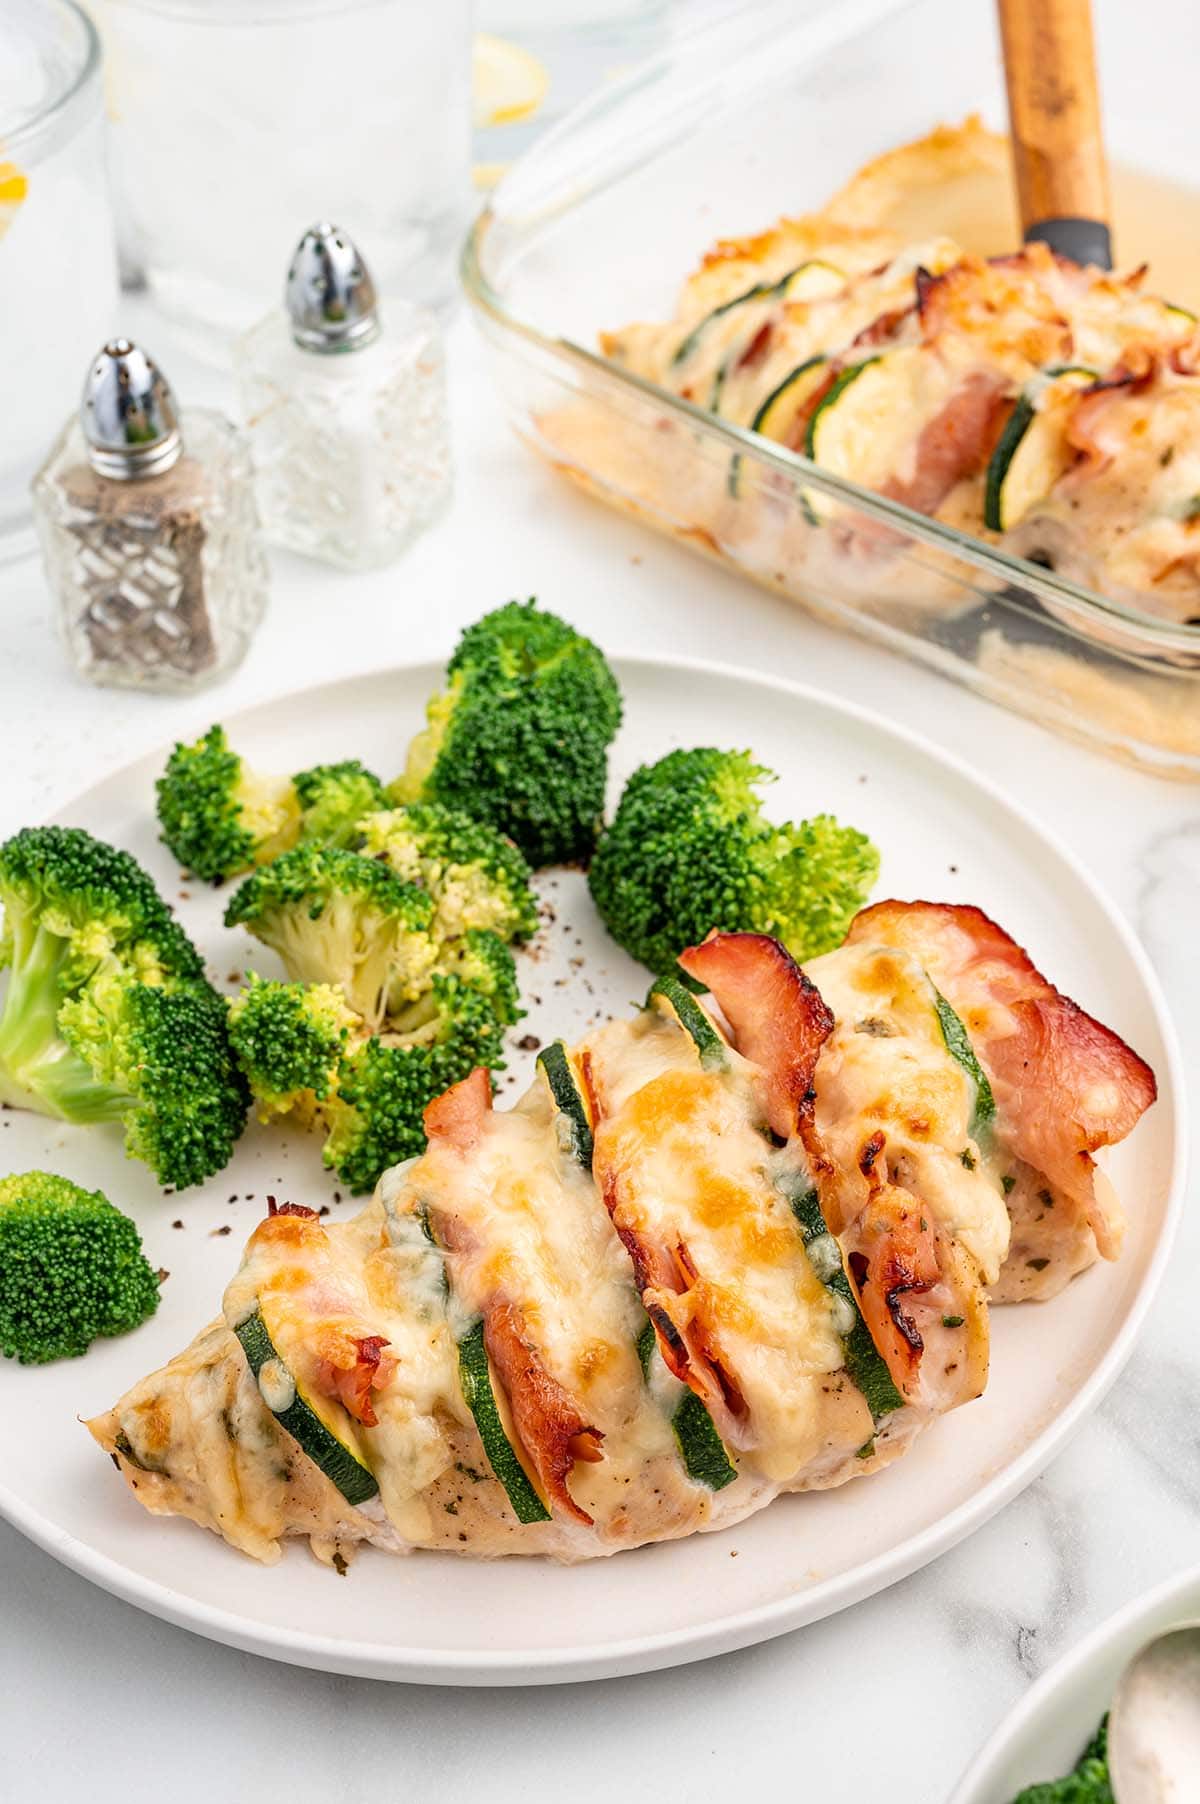 Hasselback Chicken served with broccoli on the side.